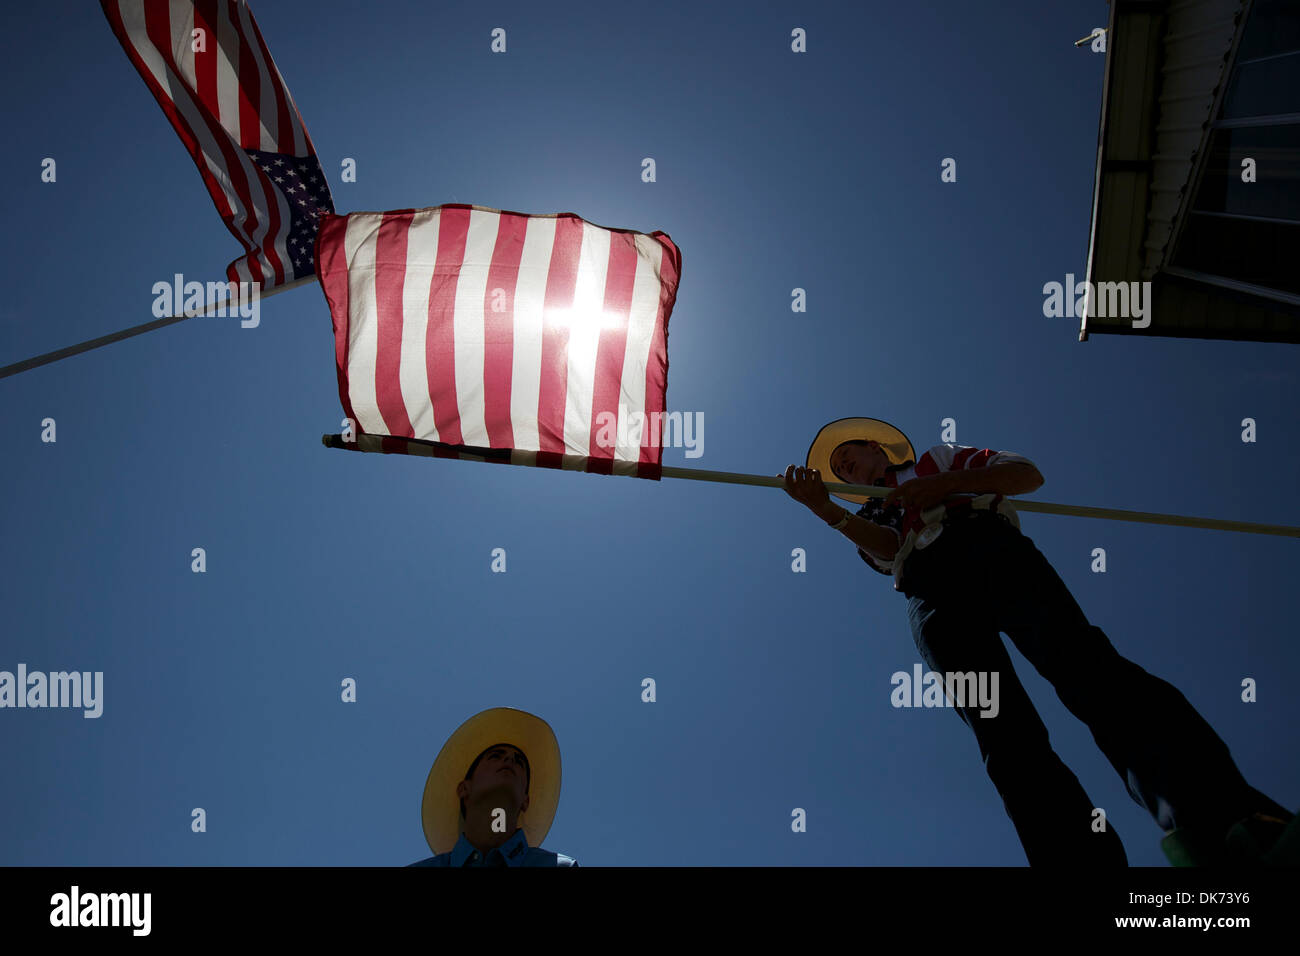 June 12, 2011 - Livermore, California, U.S - Arena workers unfurl an American flag at the 93rd Annual Livermore Rodeo at Robertson Park. (Credit Image: © Matt Cohen/Southcreek Global/ZUMAPRESS.com) Stock Photo